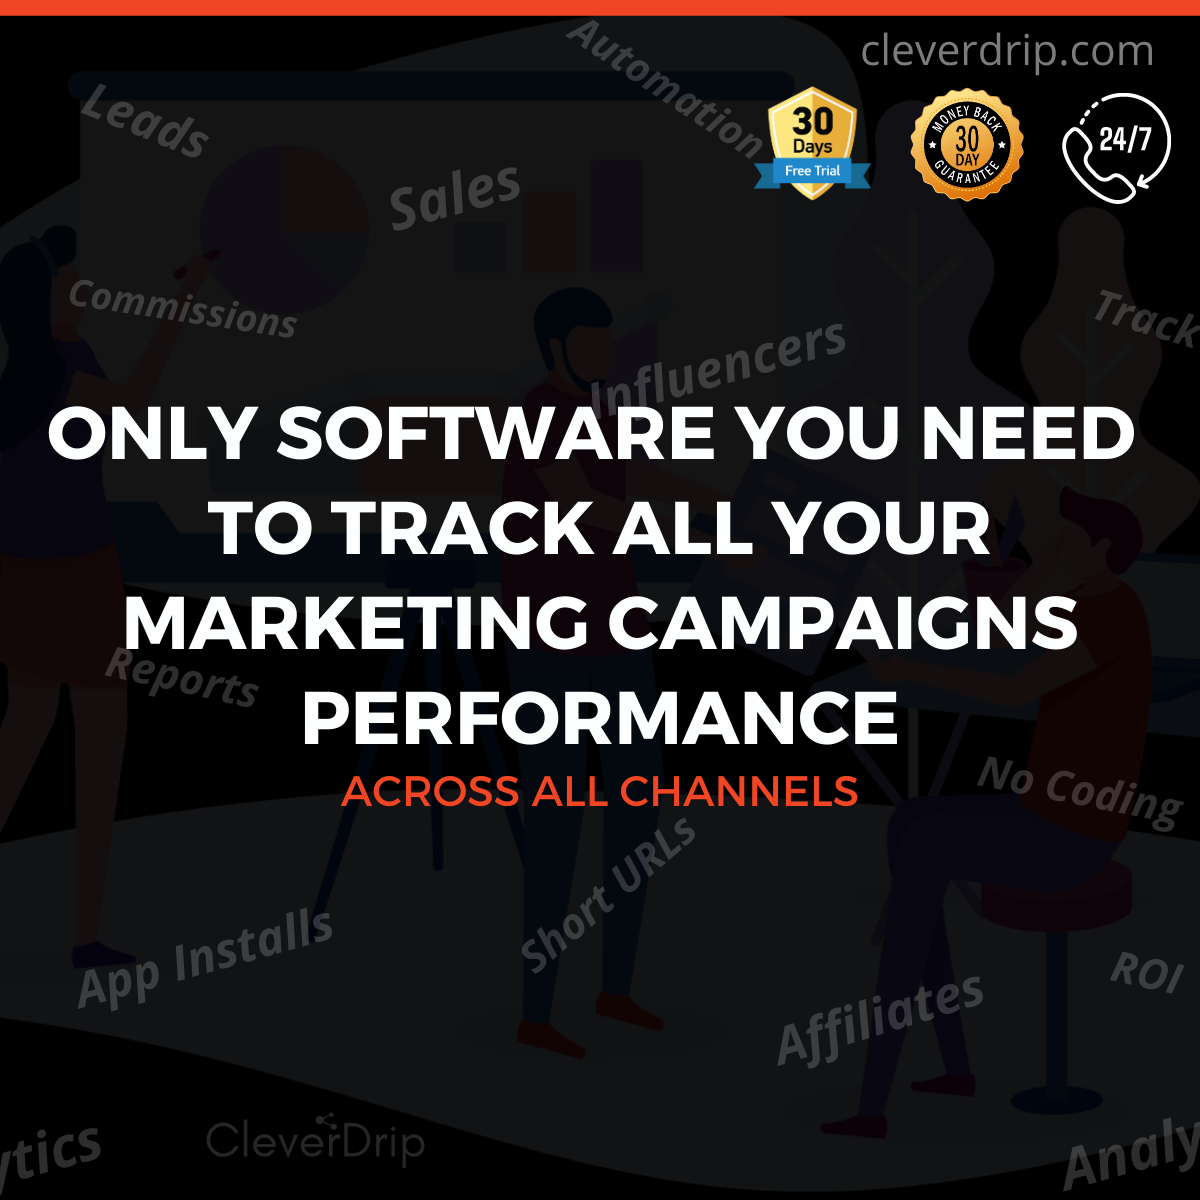 Track all your online marketing campaigns performance in one place